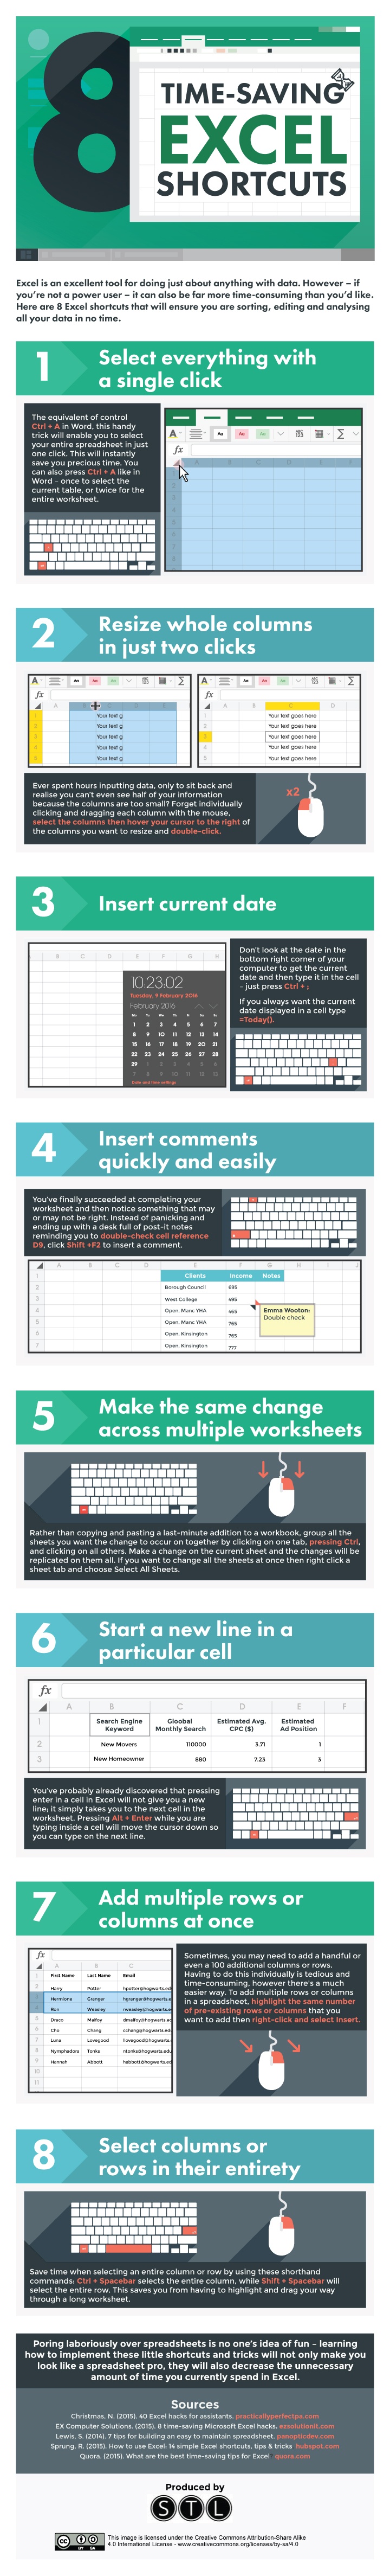 Excel_Shortcuts_Infographic.jpg